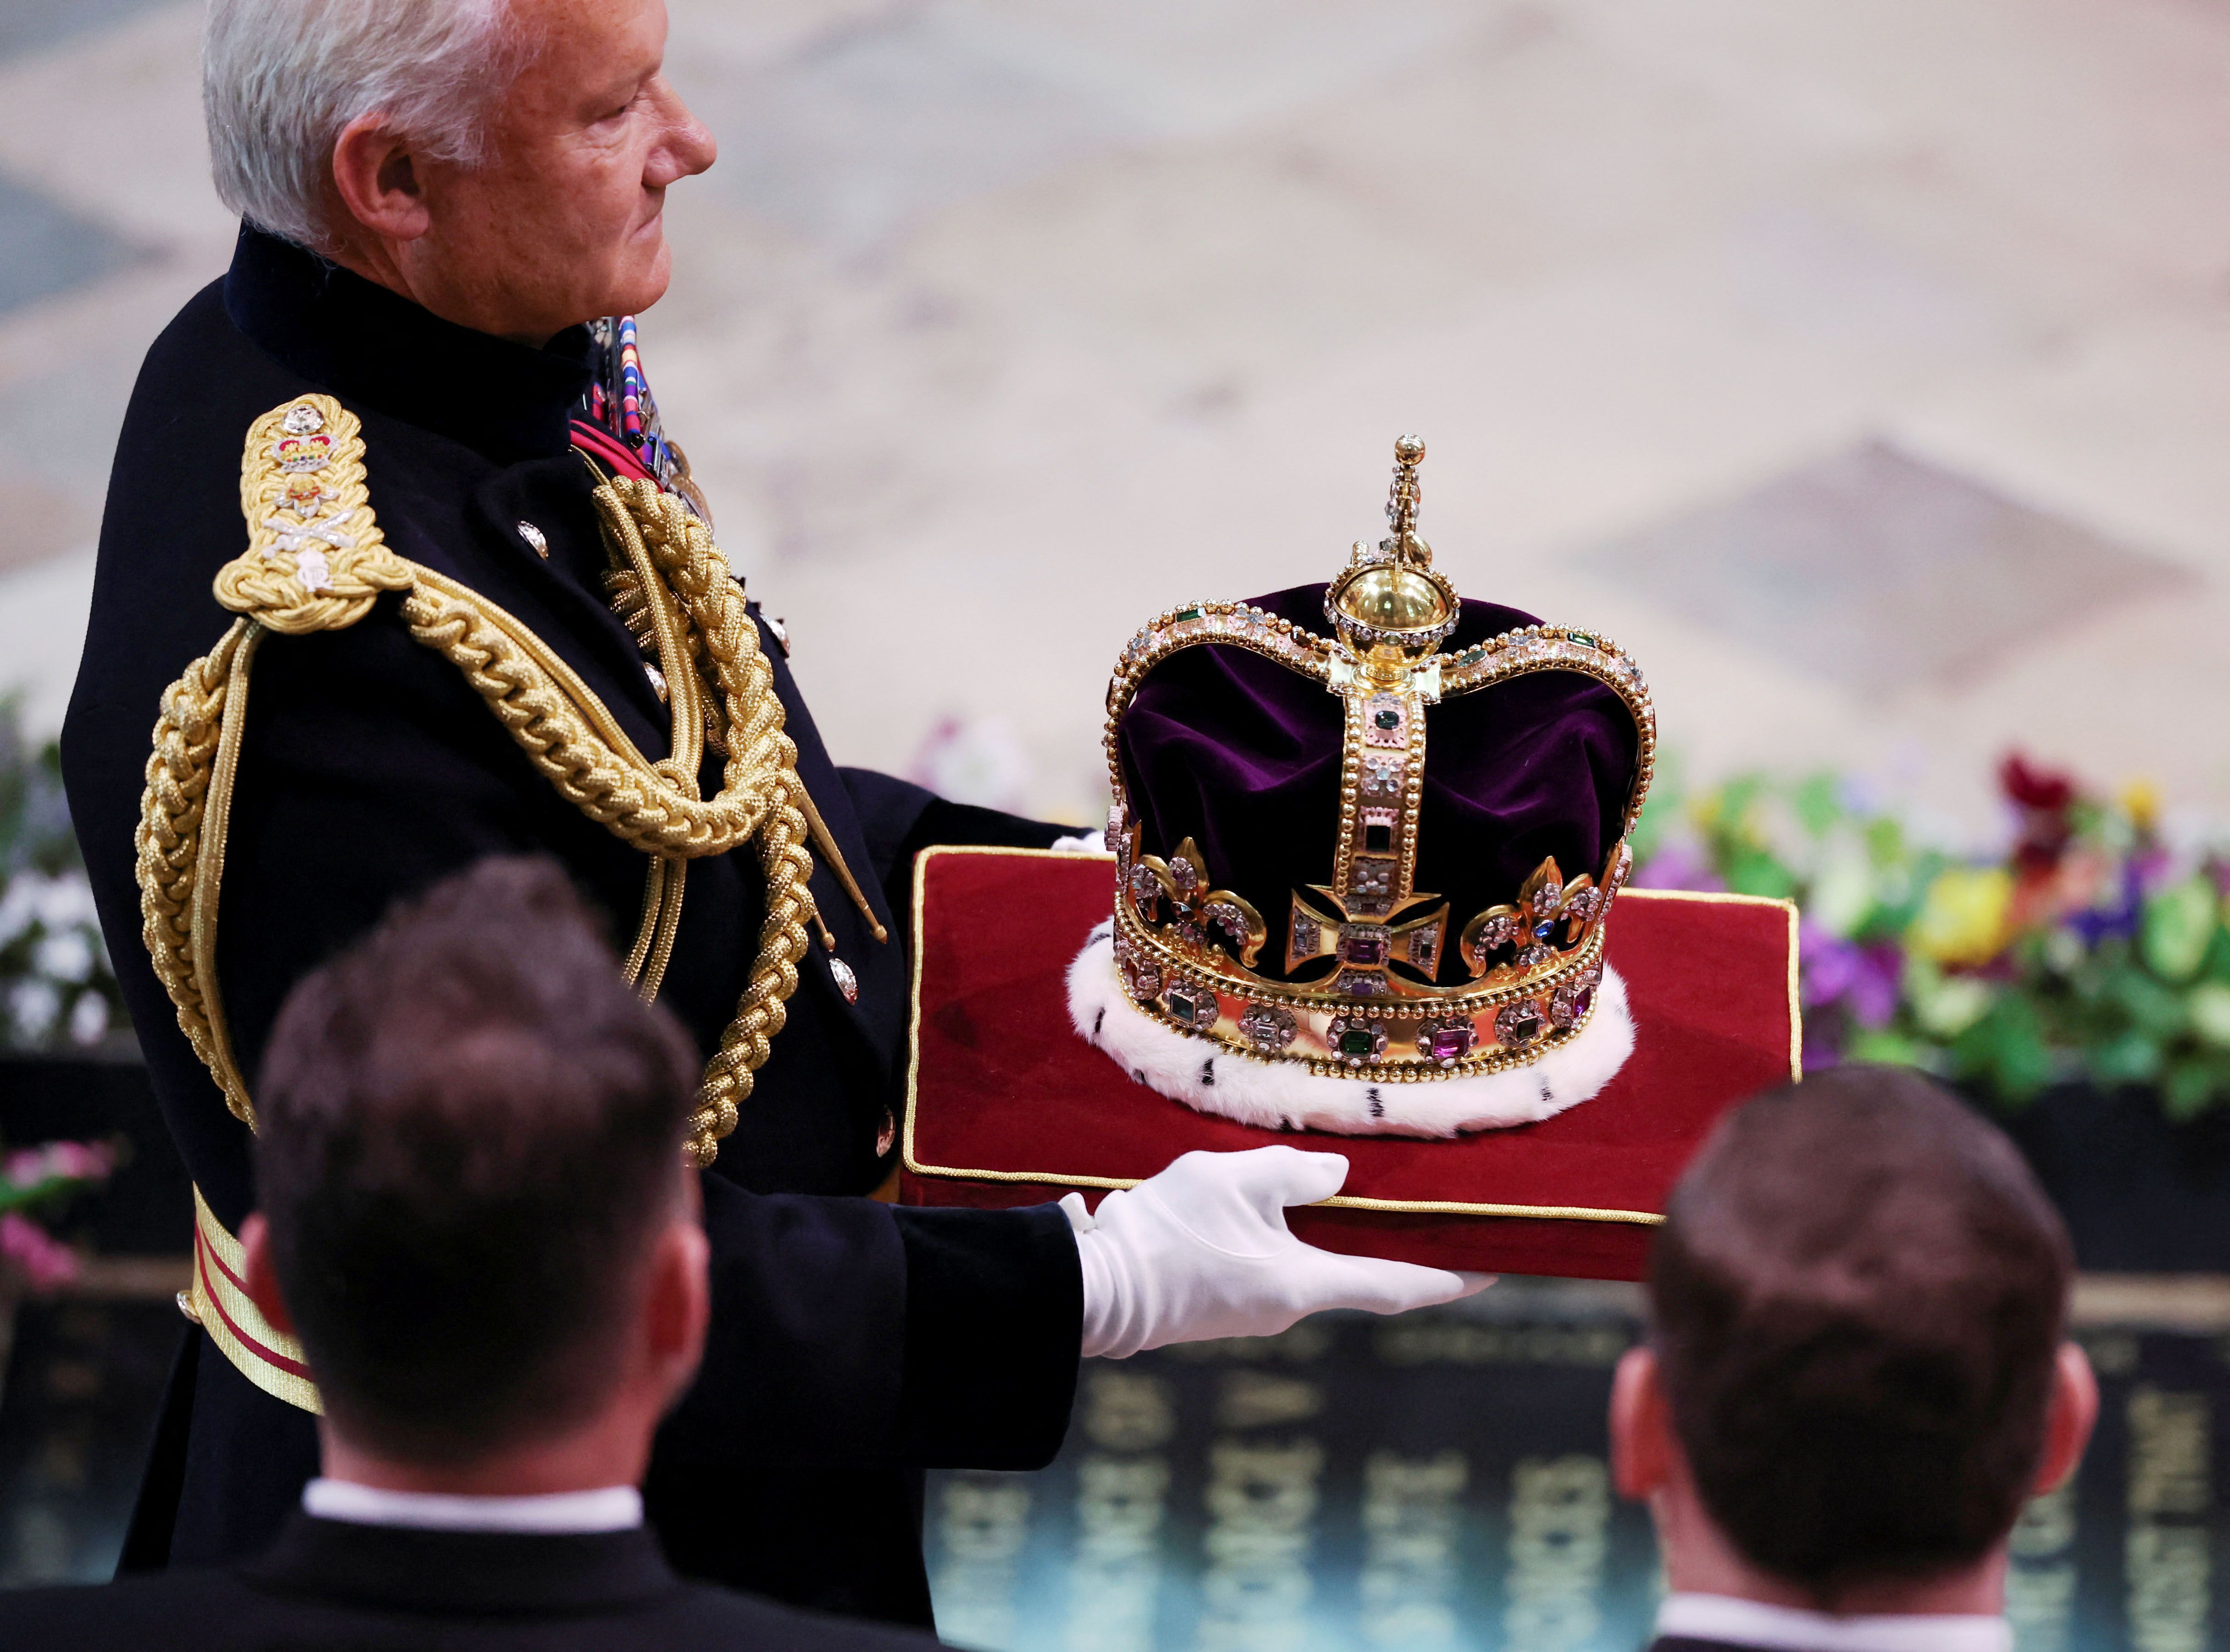 7th Century St Edward's Crown arrives for the Coronation of King Charles III 